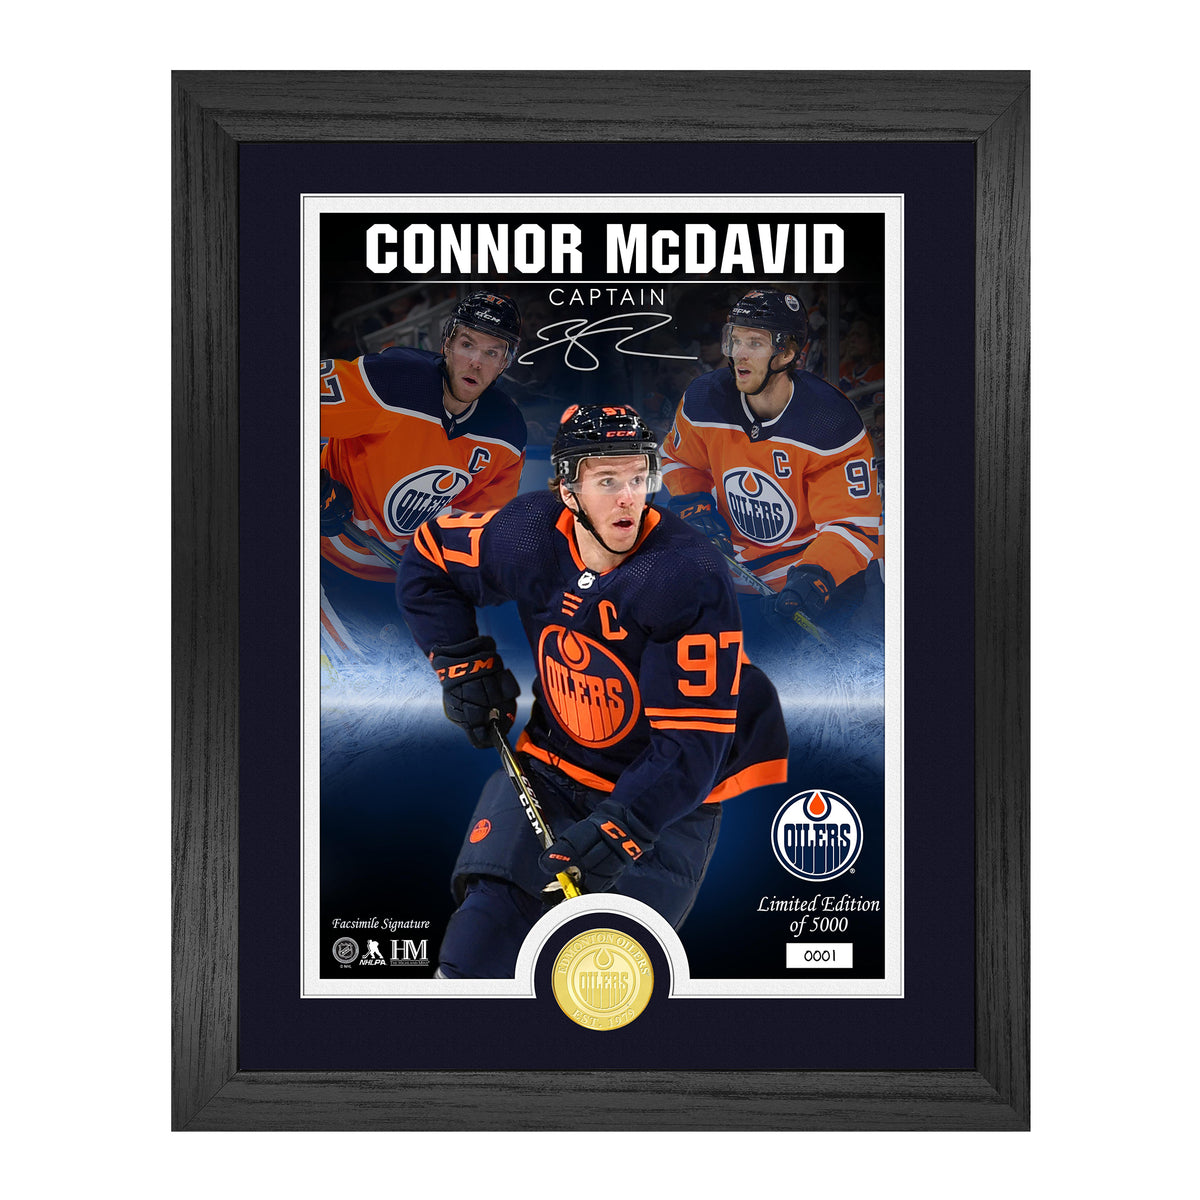 MC DAVID (Oilers) Player Signature Series Coin in Framed Photo